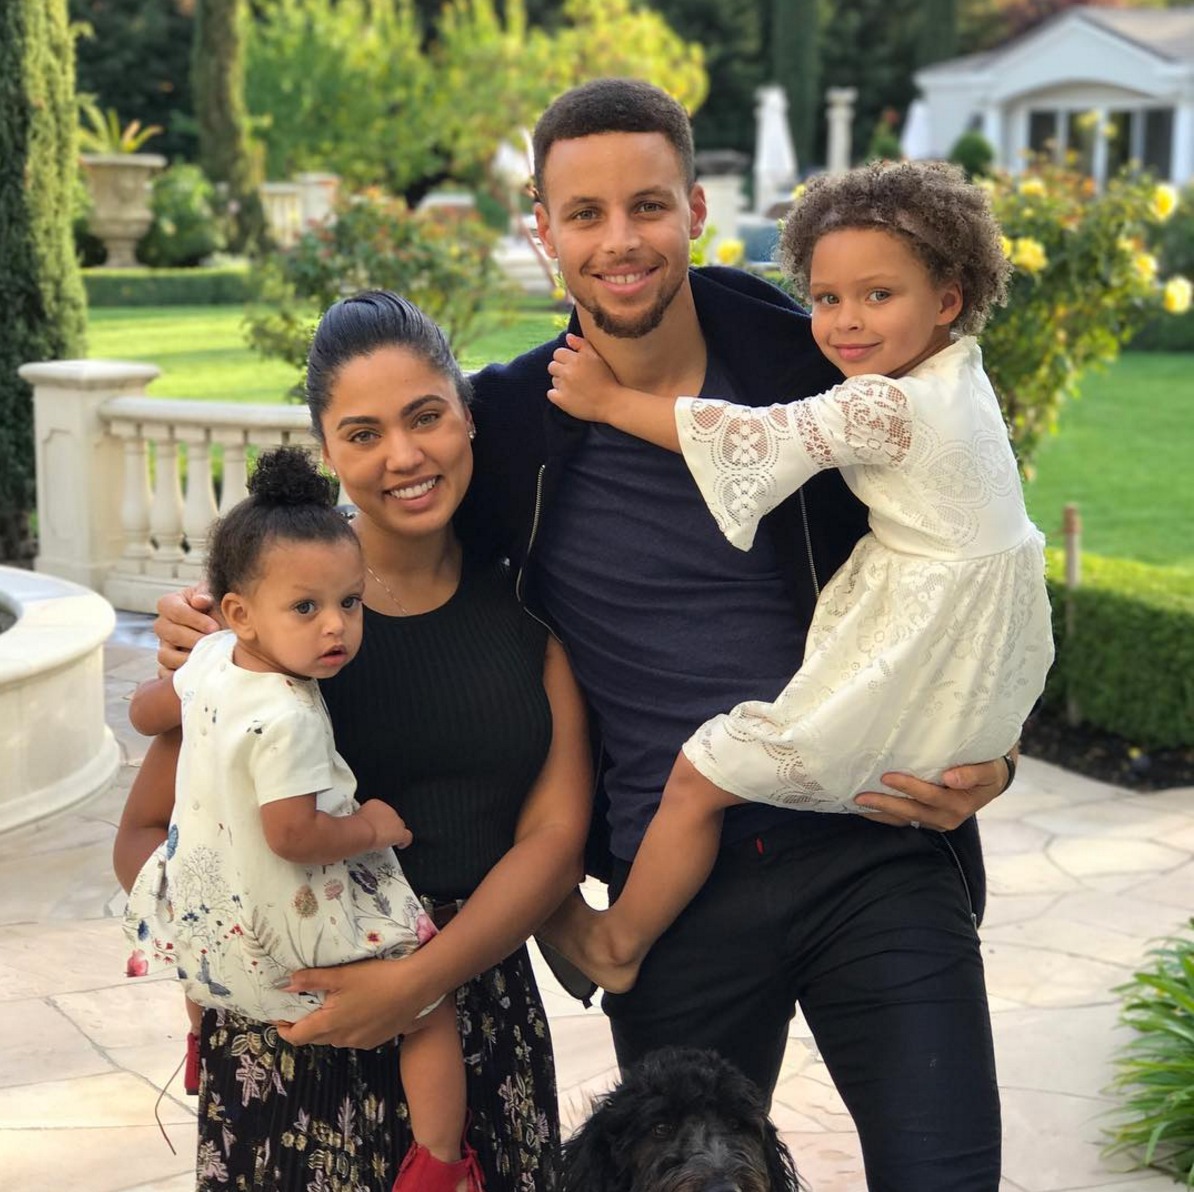 likhoa youre the hotel worker and my daddy stephen currys cooking led to an incredibly wholesome moment with daughters riley and ryan 656363fc31ba9 “you’re The Hotel Worker And My Daddy!”: Stephen Curry’s Cooking Led To An Incredibly Wholesome Moment With Daughters Riley And Ryan